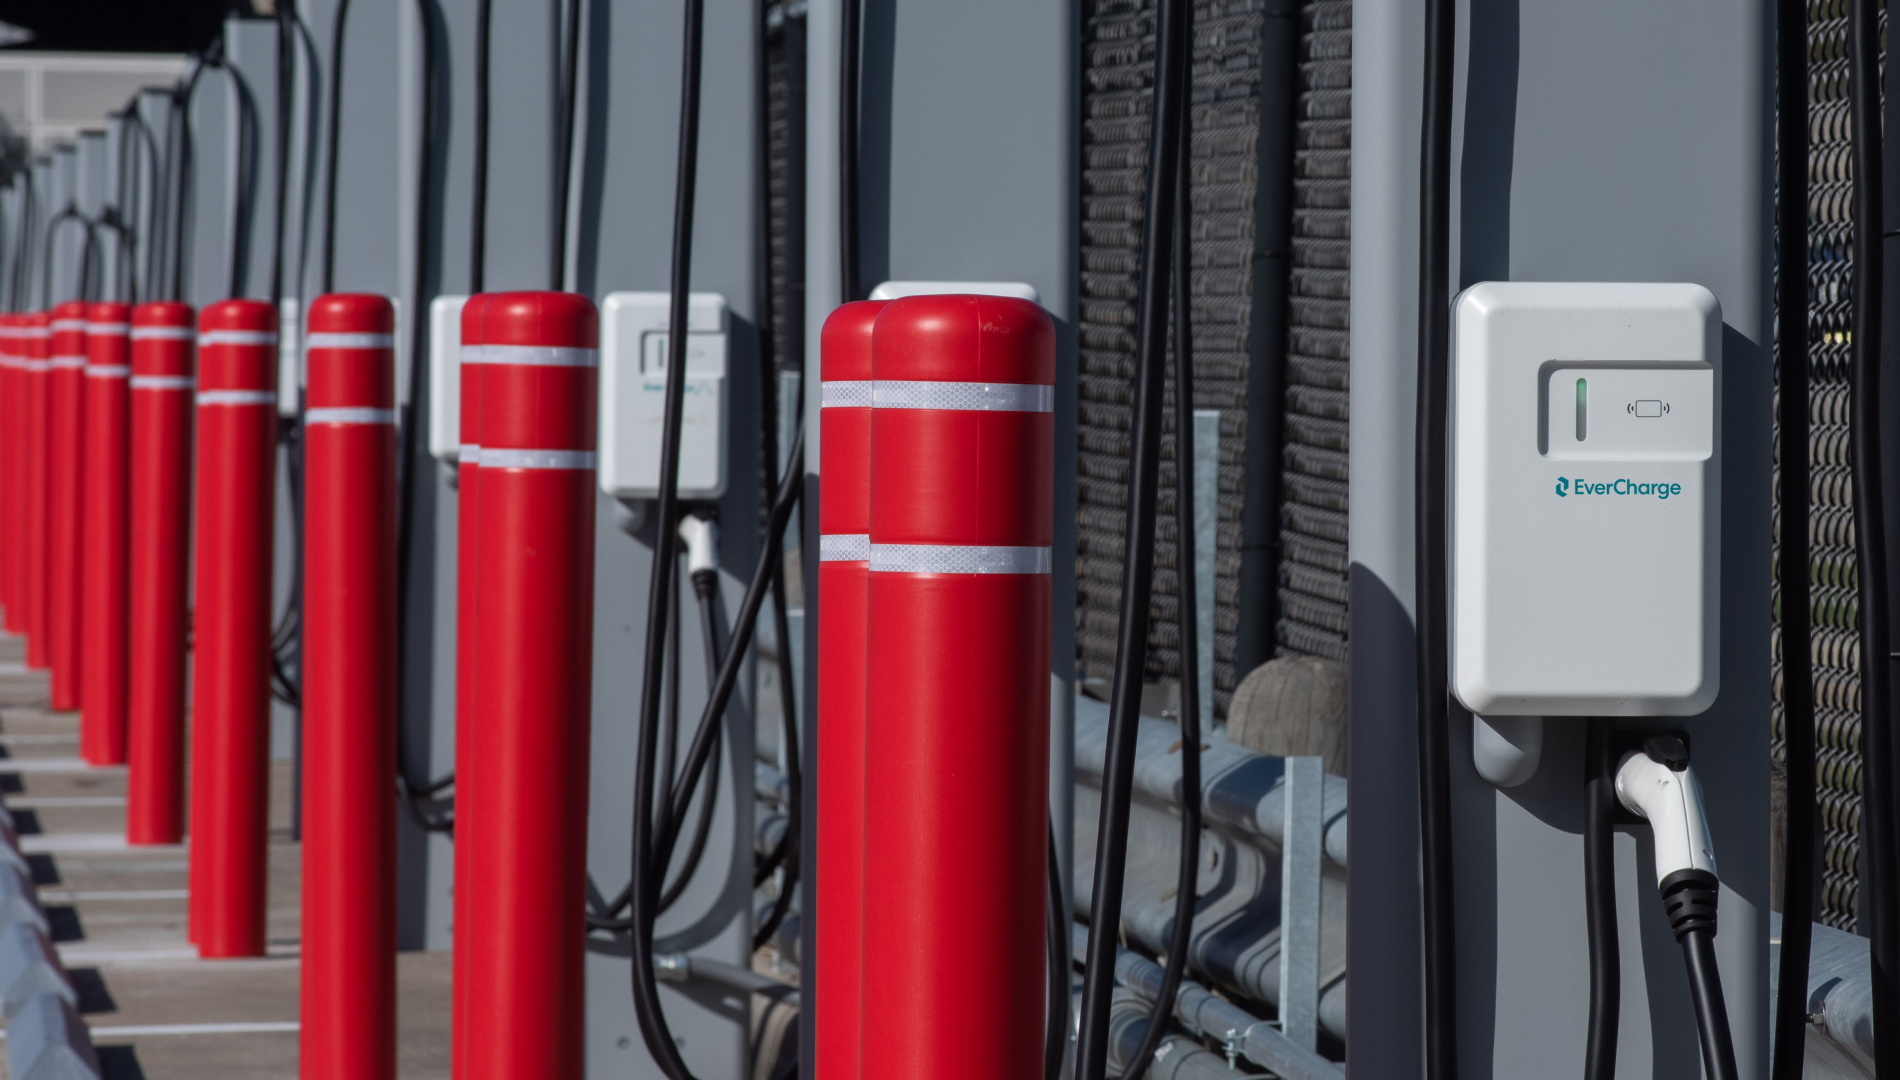 5 Considerations for Successful Fleet Electrification